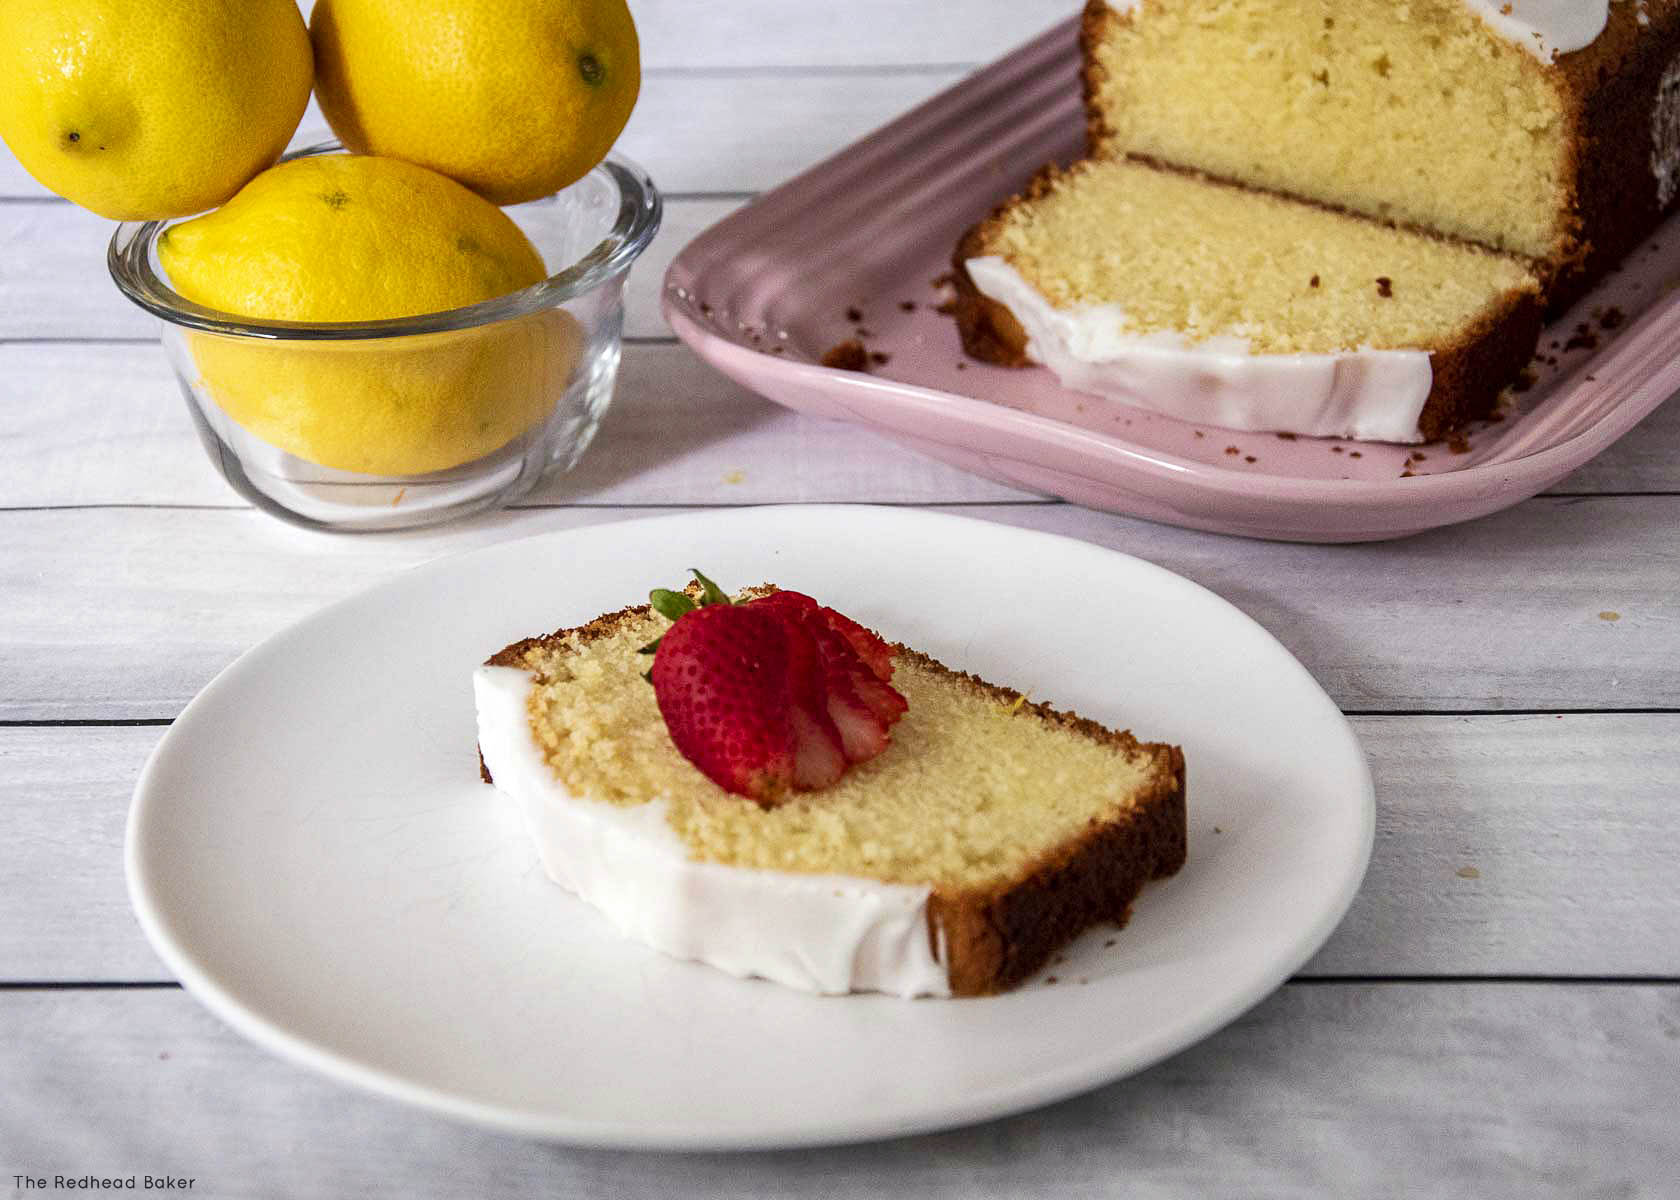 A slice of pound cake on a white plate topped with a strawberry.